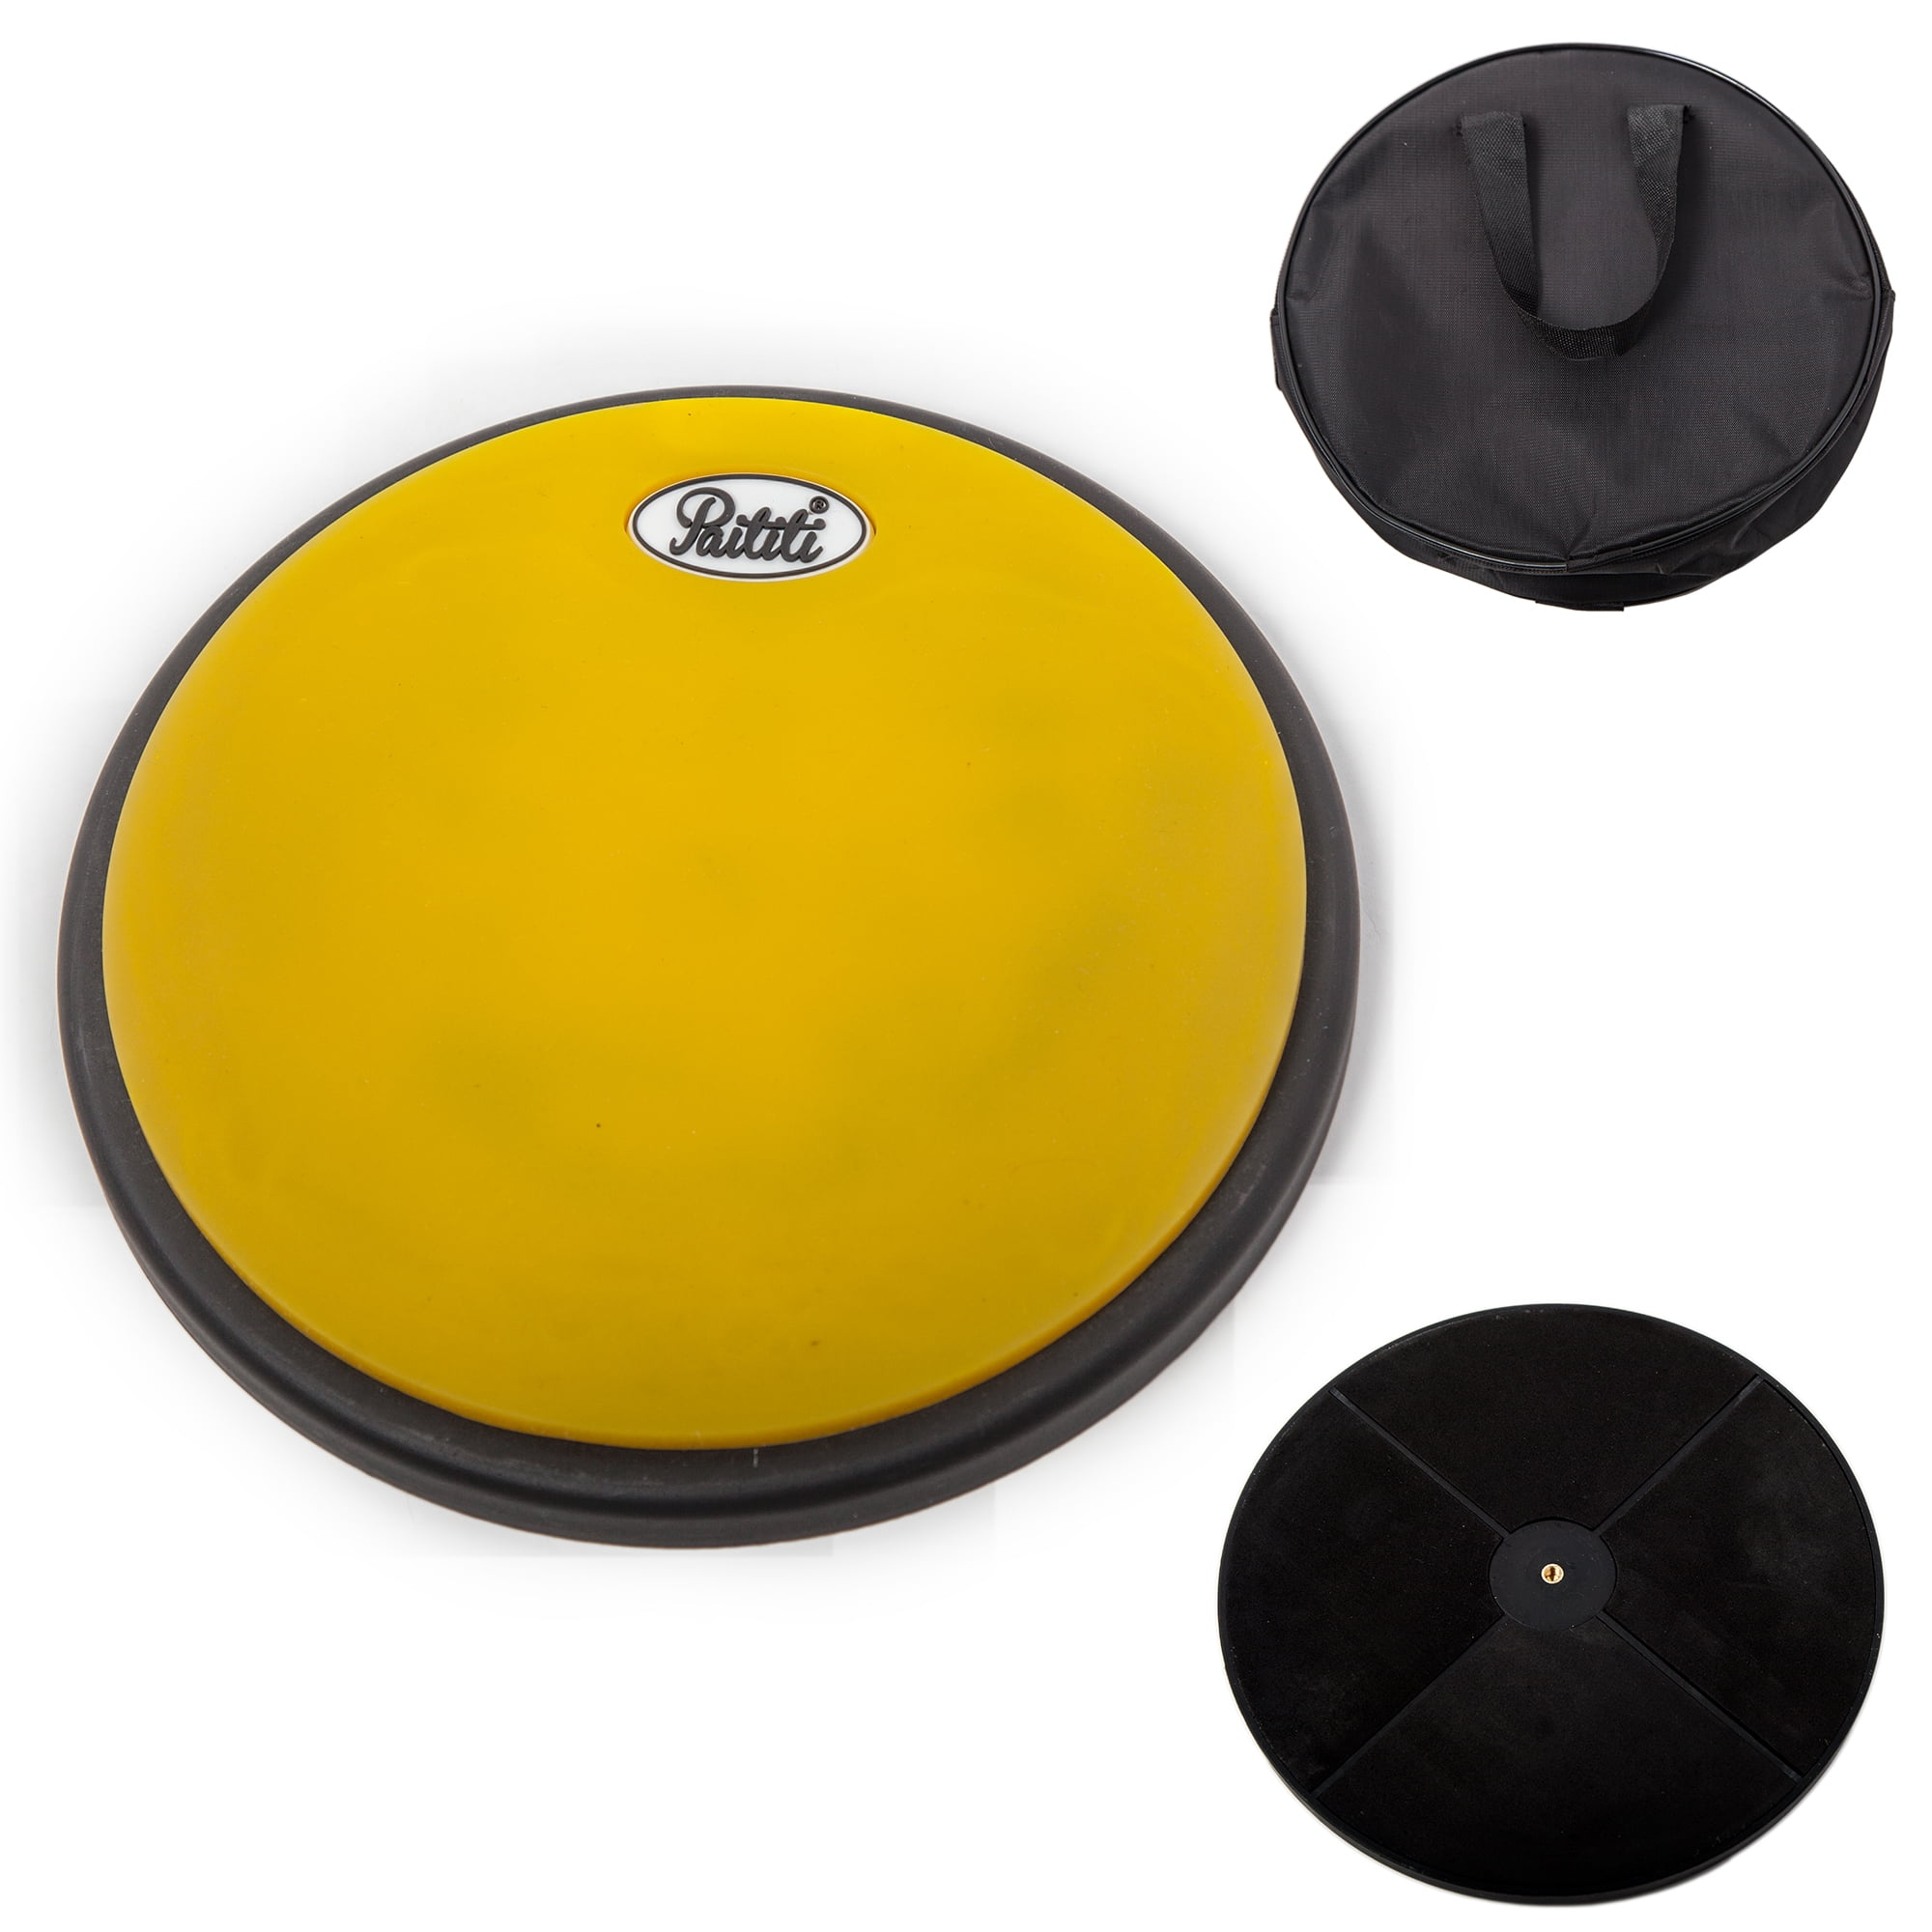 No Sticks Paititi 8 inch Practice Drum Pad with Adjustable Stand & Carrying Bag 